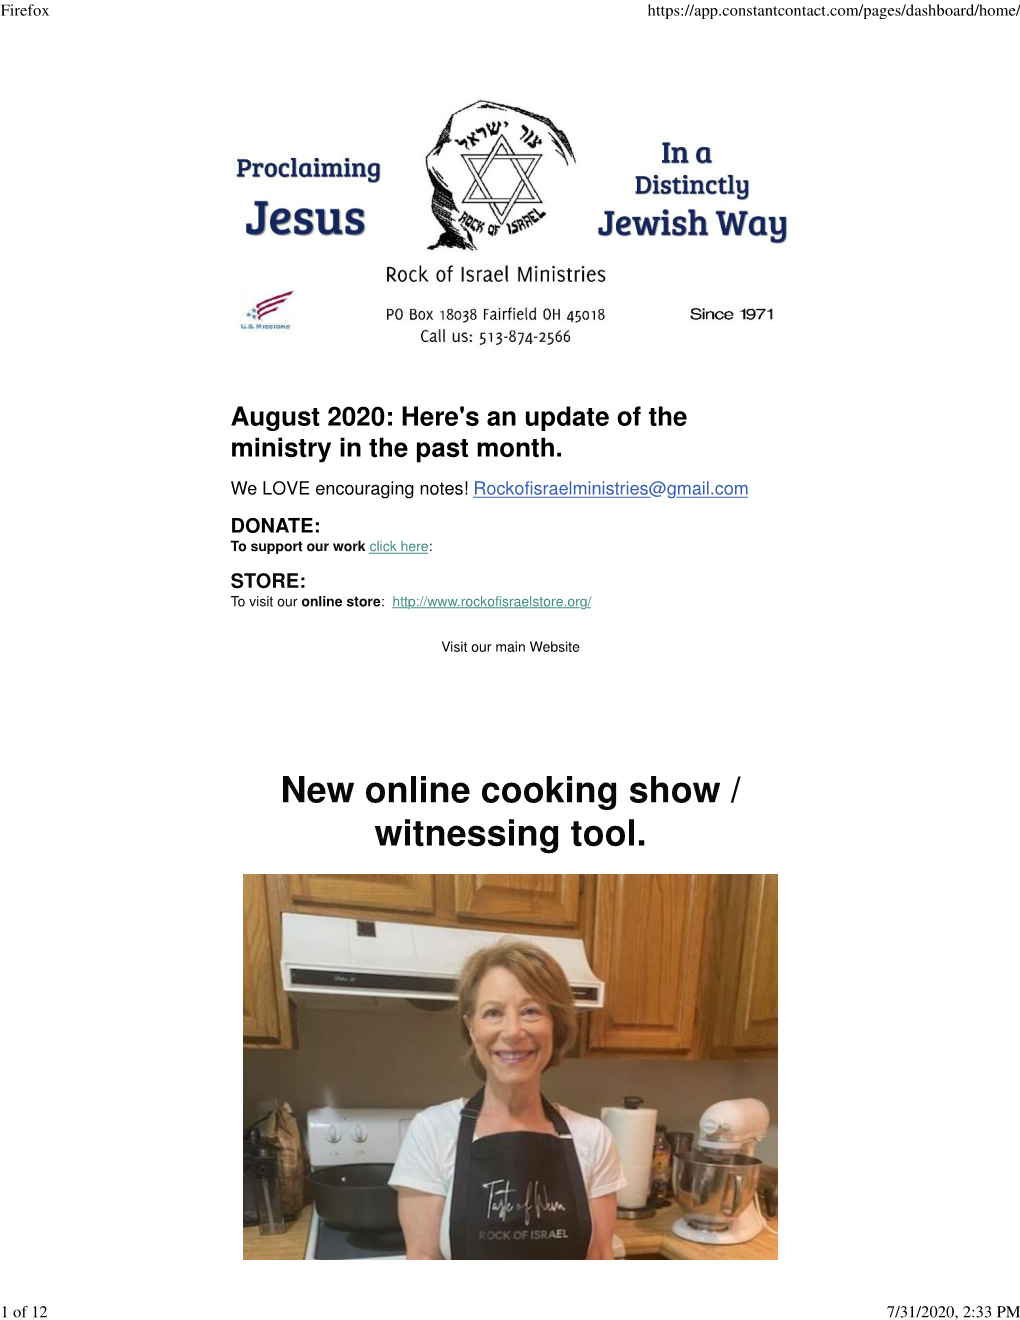 New Online Cooking Show / Witnessing Tool